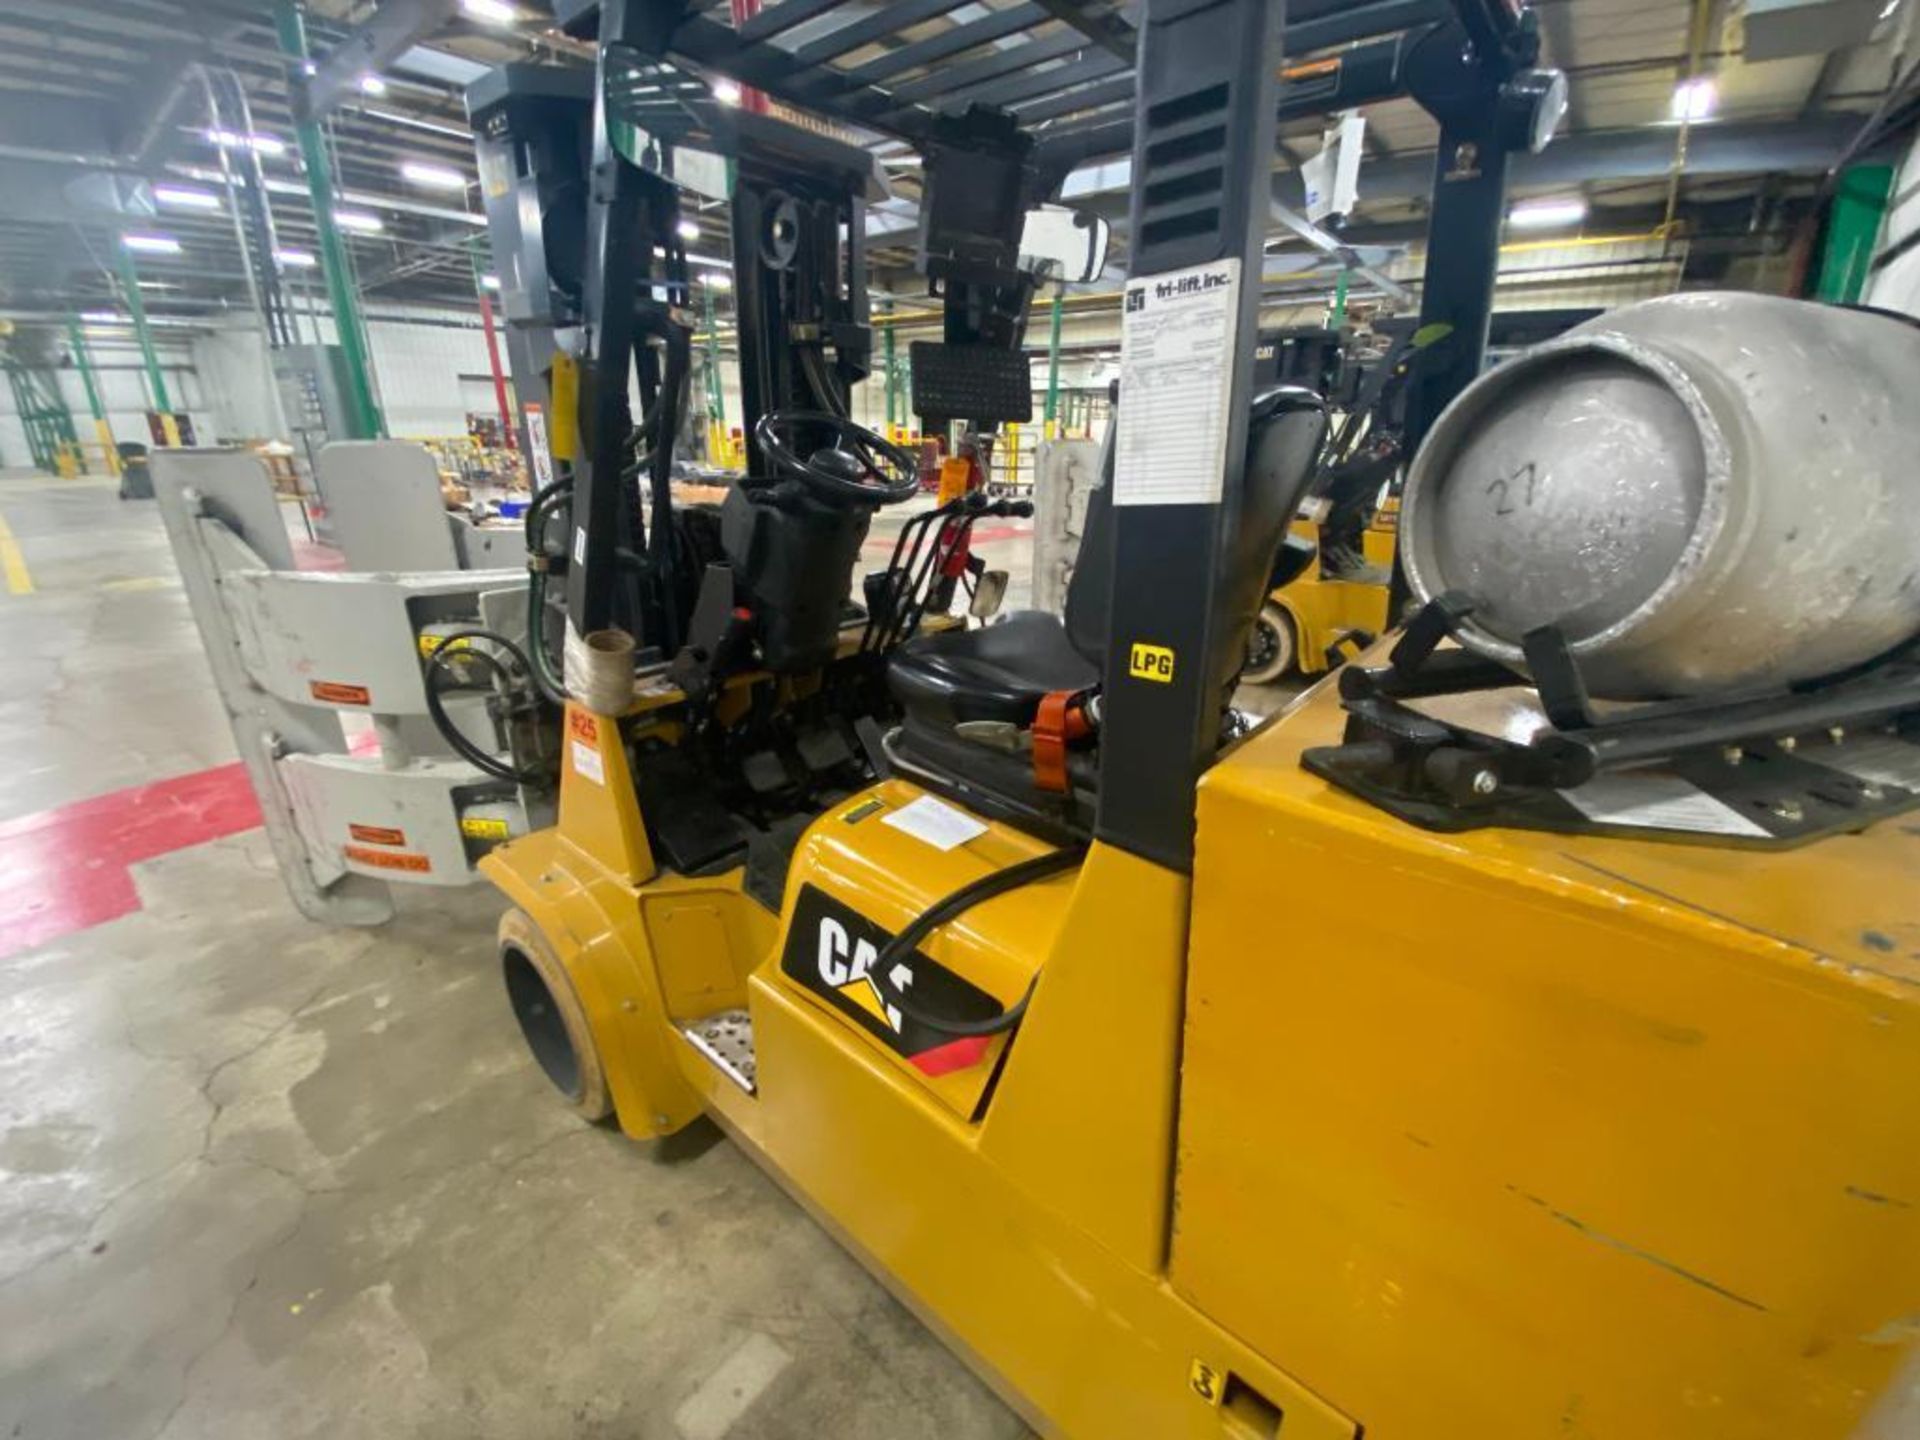 Caterpillar GC55K Forklift w/ Roll Clamp, S/N AT88B10162, 3-Stage Mast, Solid Non-Marking Tires, LP - Image 3 of 6